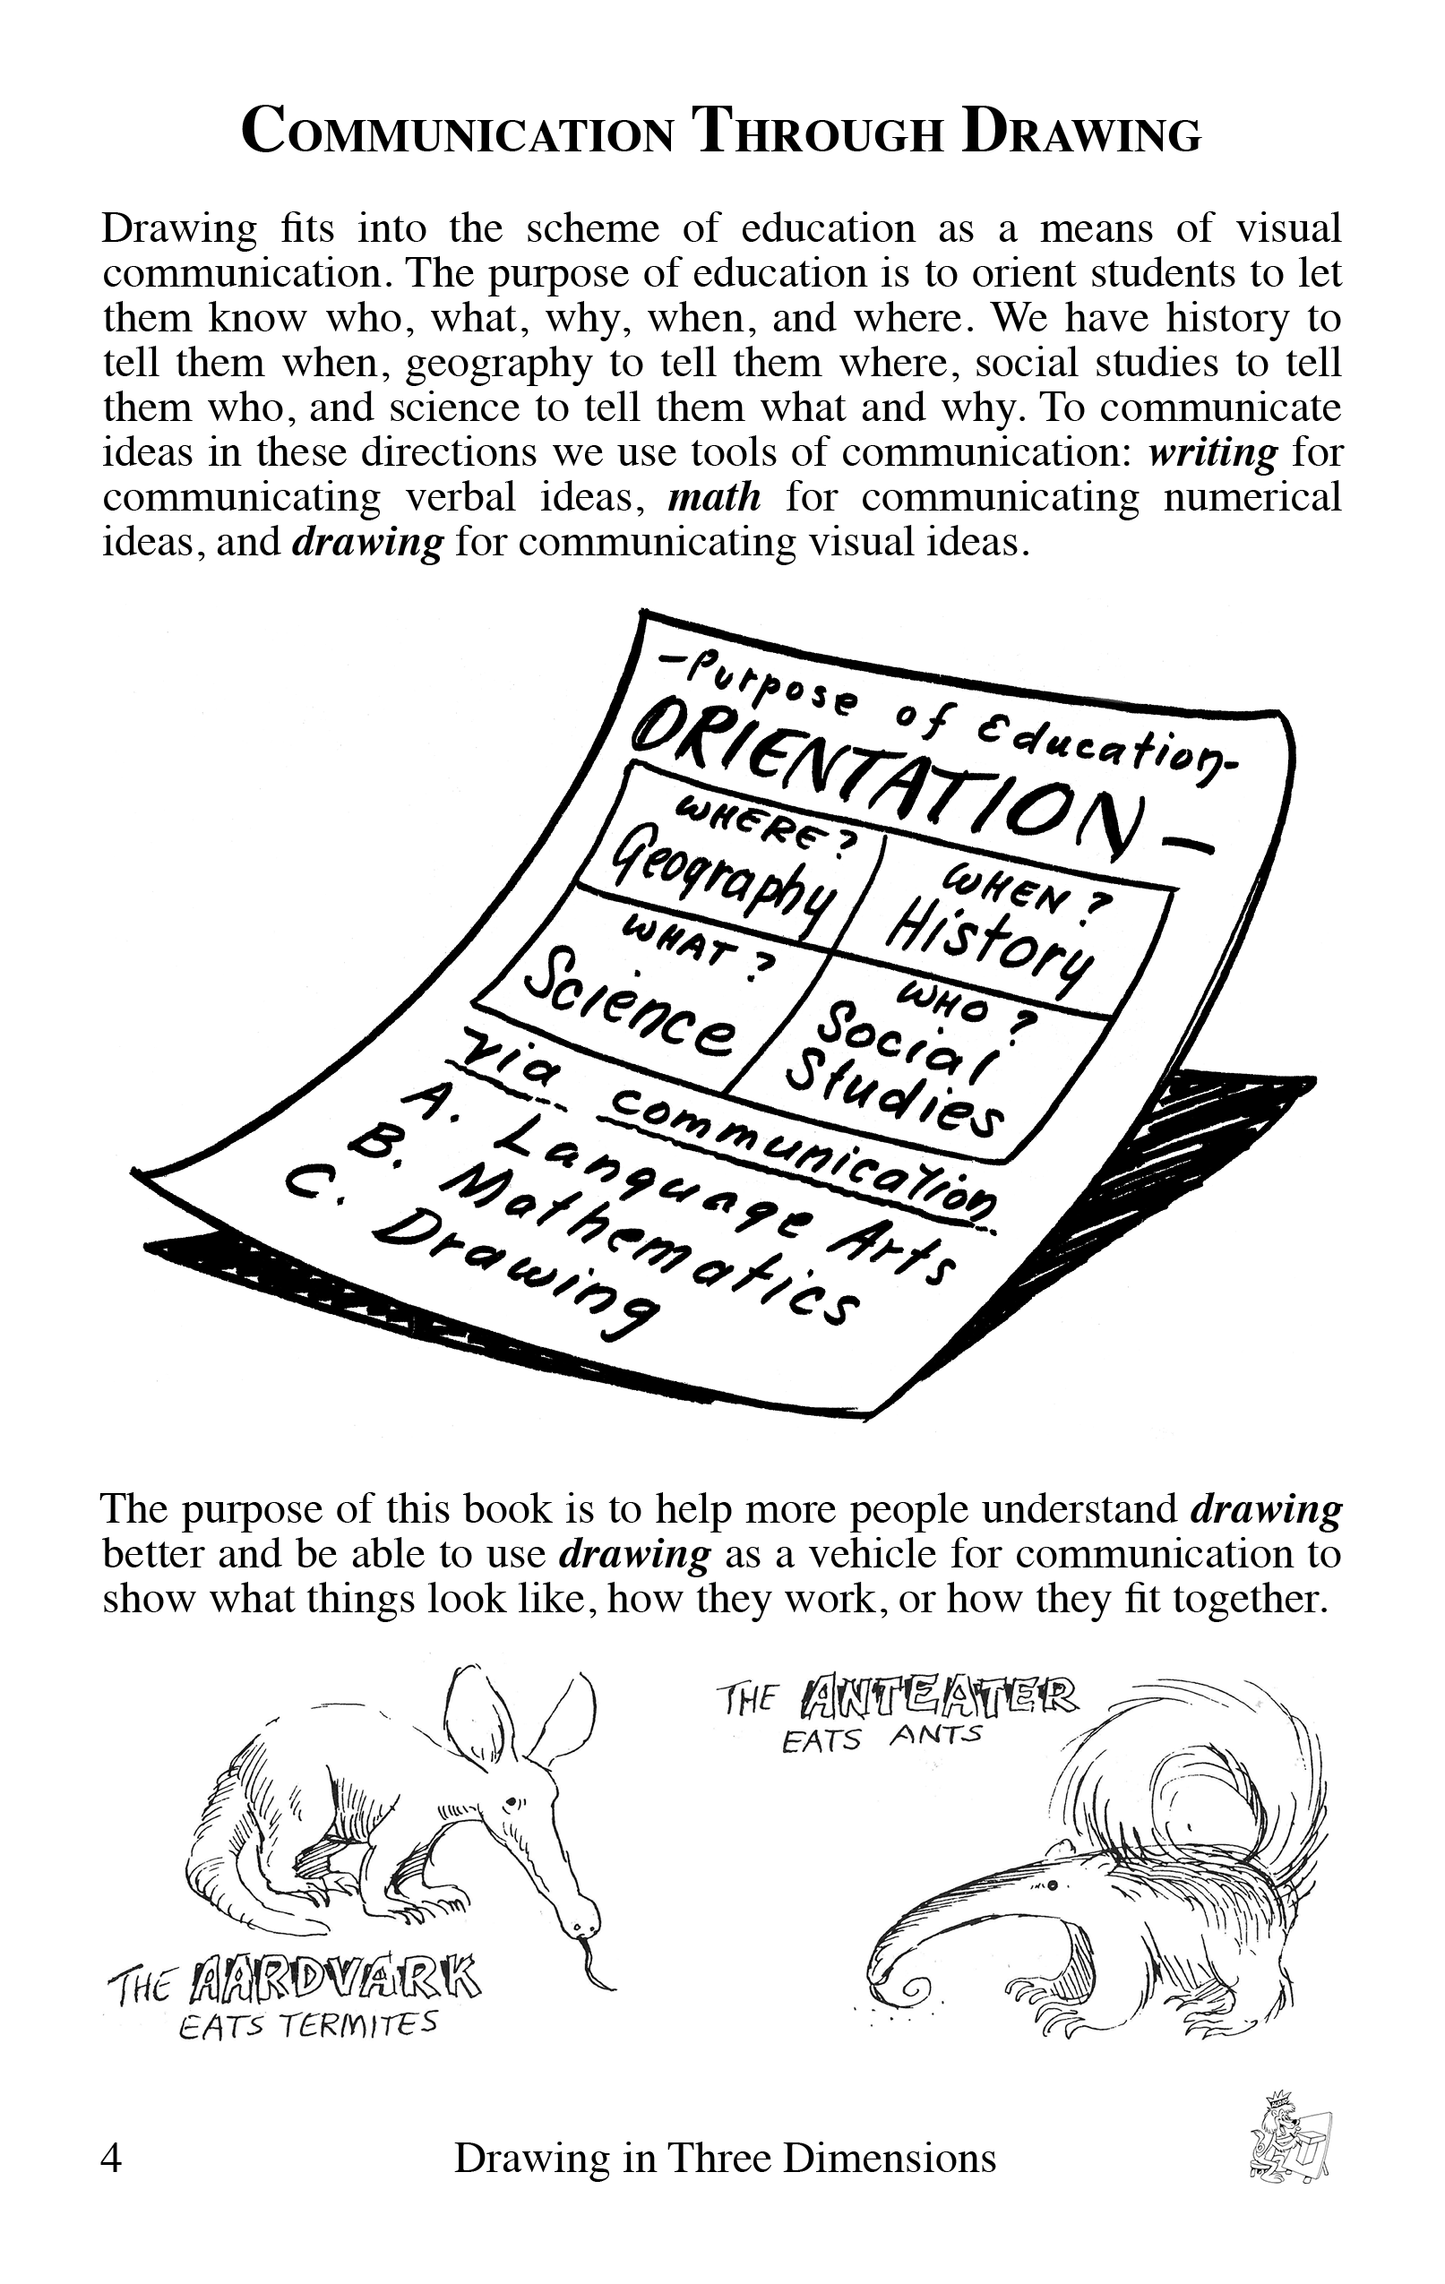 Communication Through Drawing sample page from the book Drawing in Three Dimensions by Bruce McIntyre 